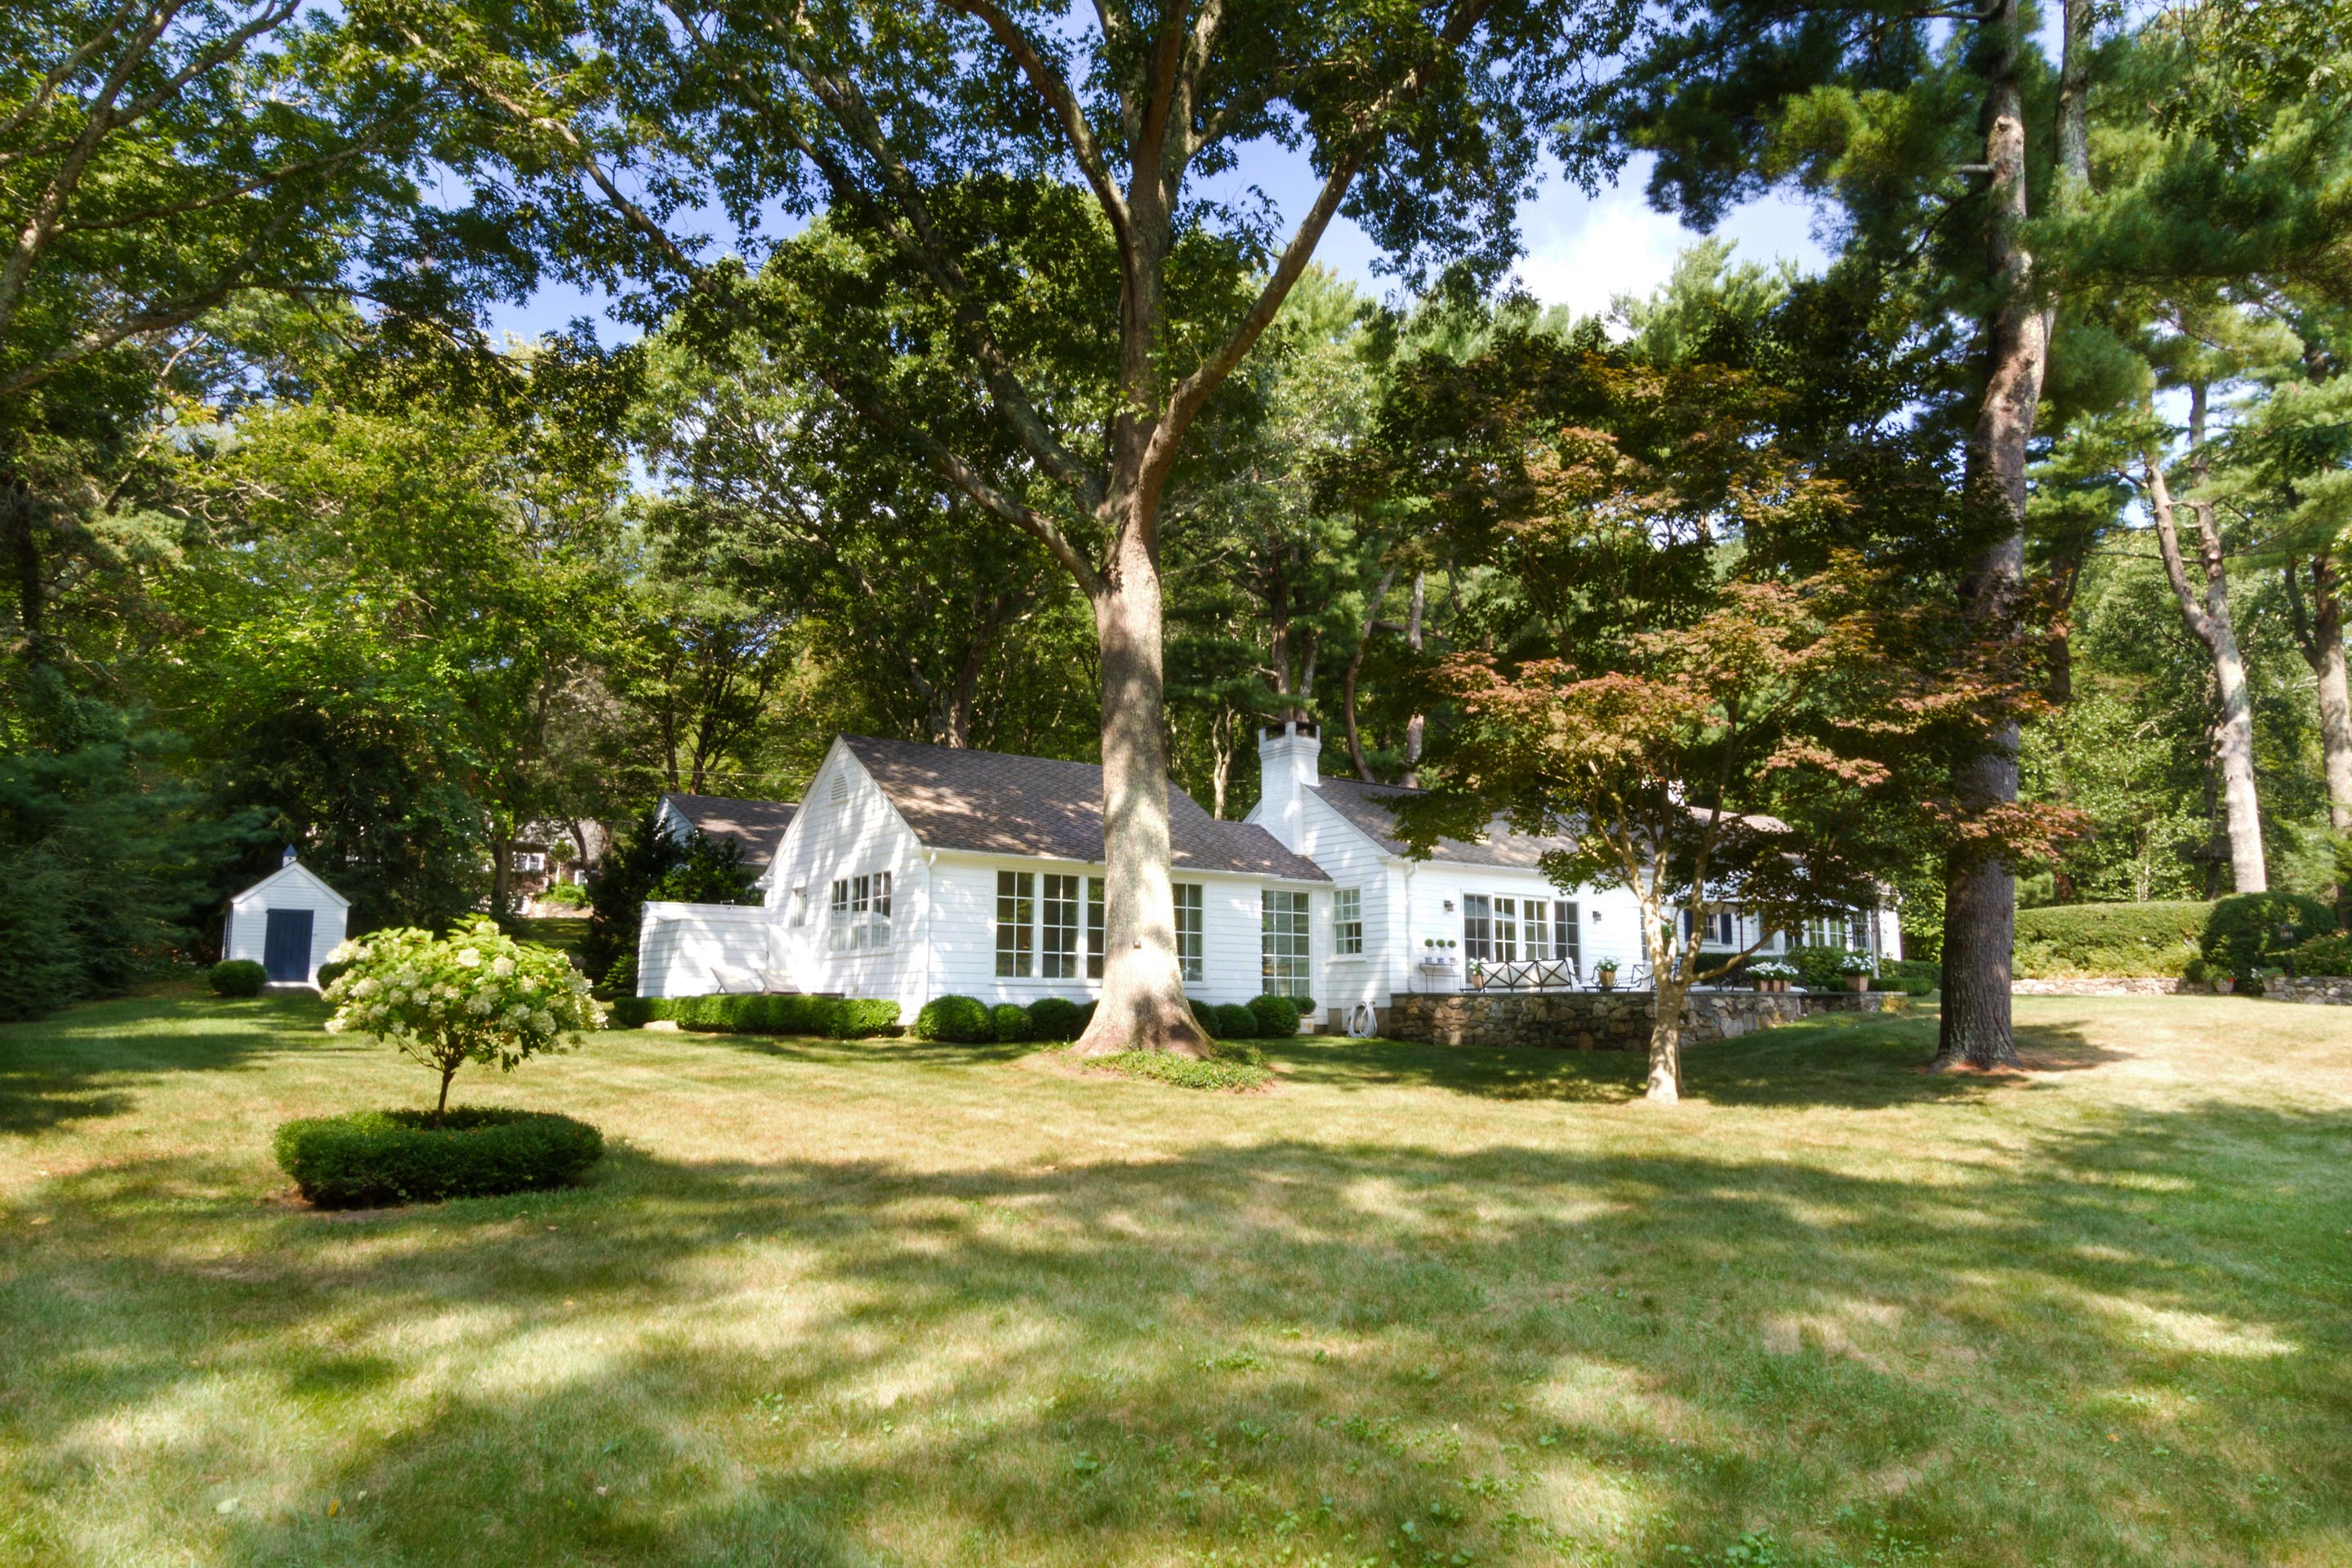 “STONEHEDGE COTTAGE” SELLS FOR $1.675M, MARKING  SECOND HIGHEST SALE IN SAUNDERSTOWN YEAR-TO-DATE*